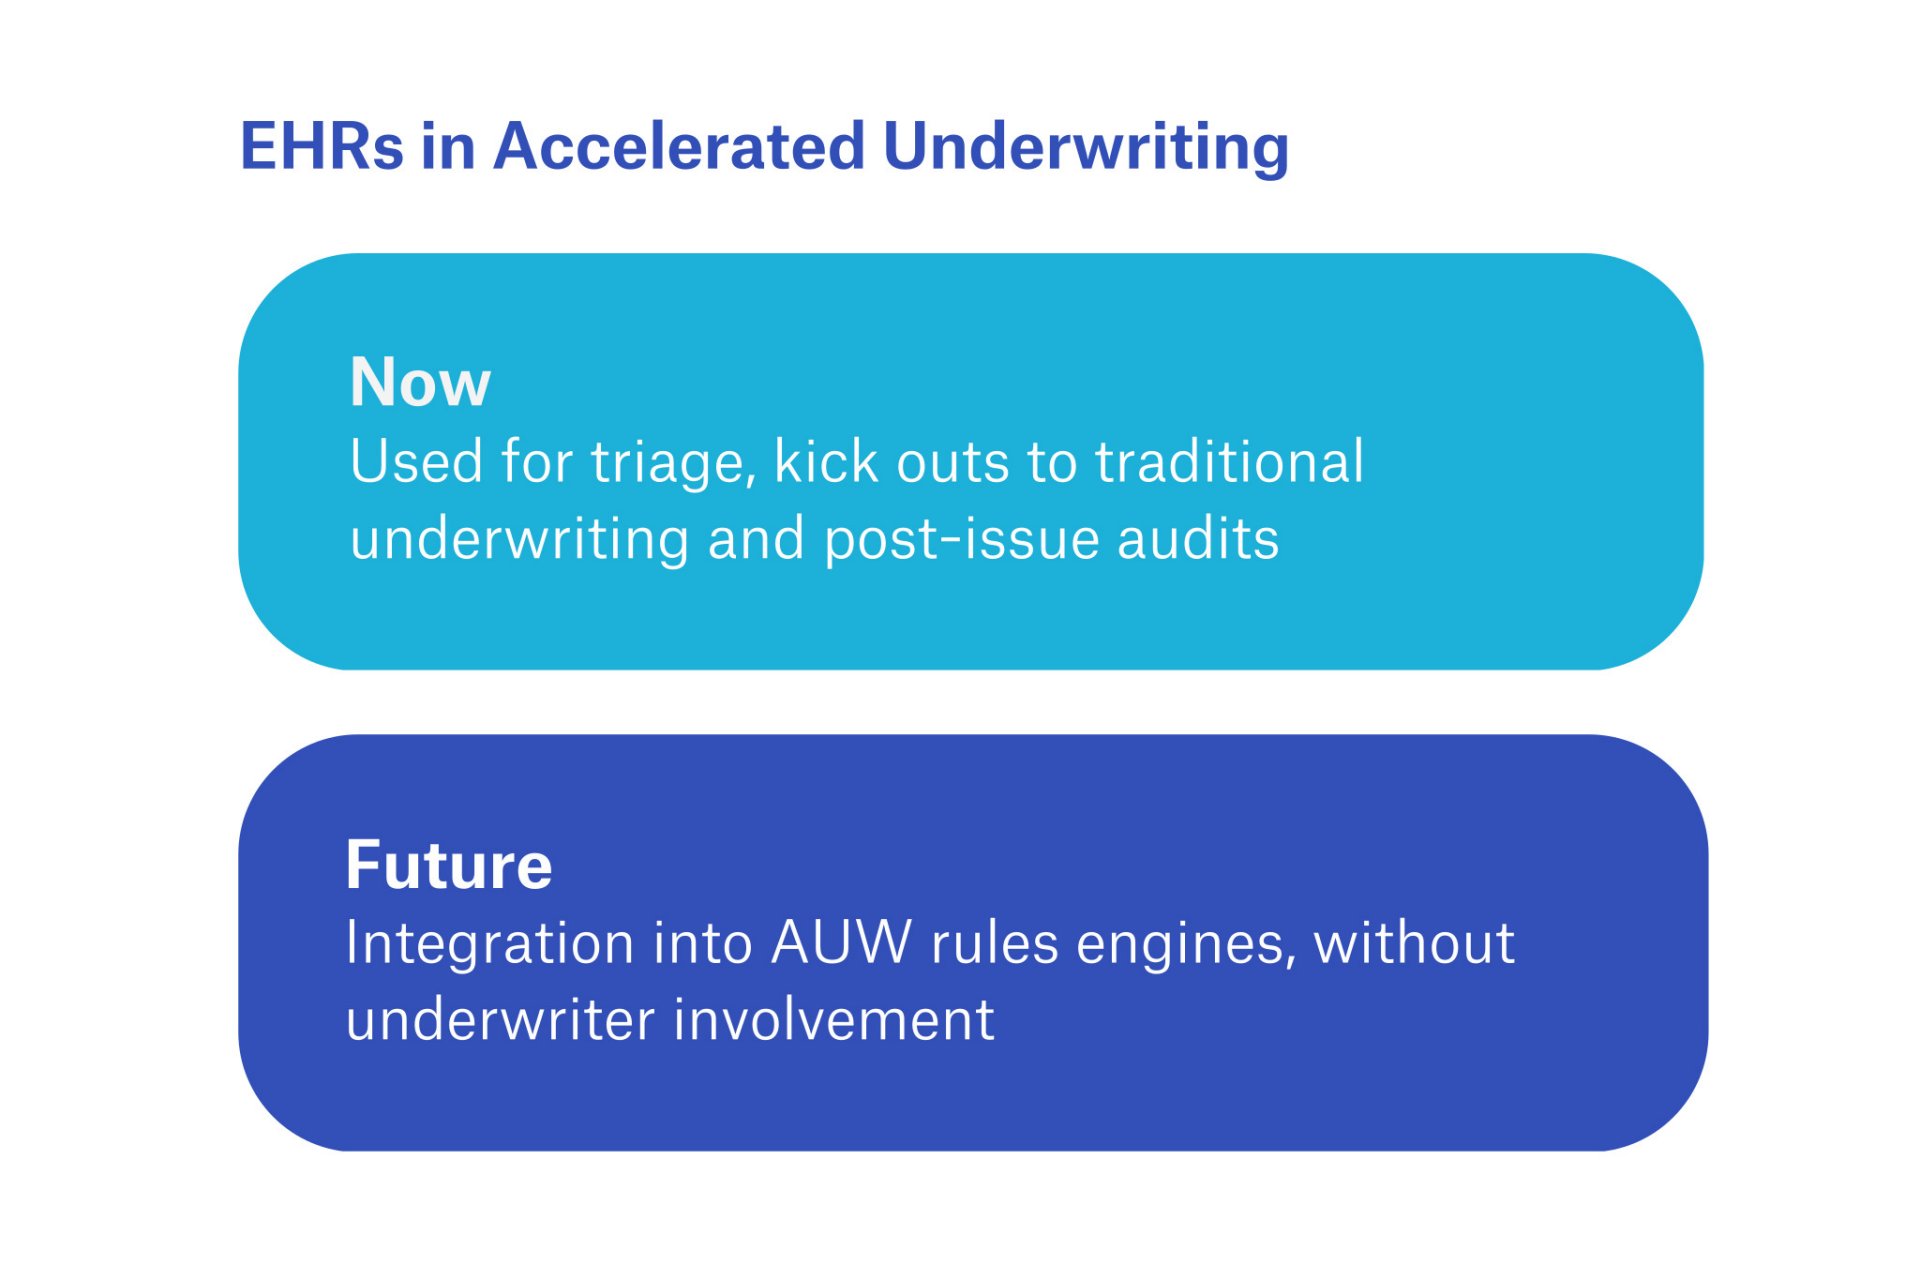 Infographic showing how EHRs are used in accelerated underwriting today, and how they will be used in the future.  